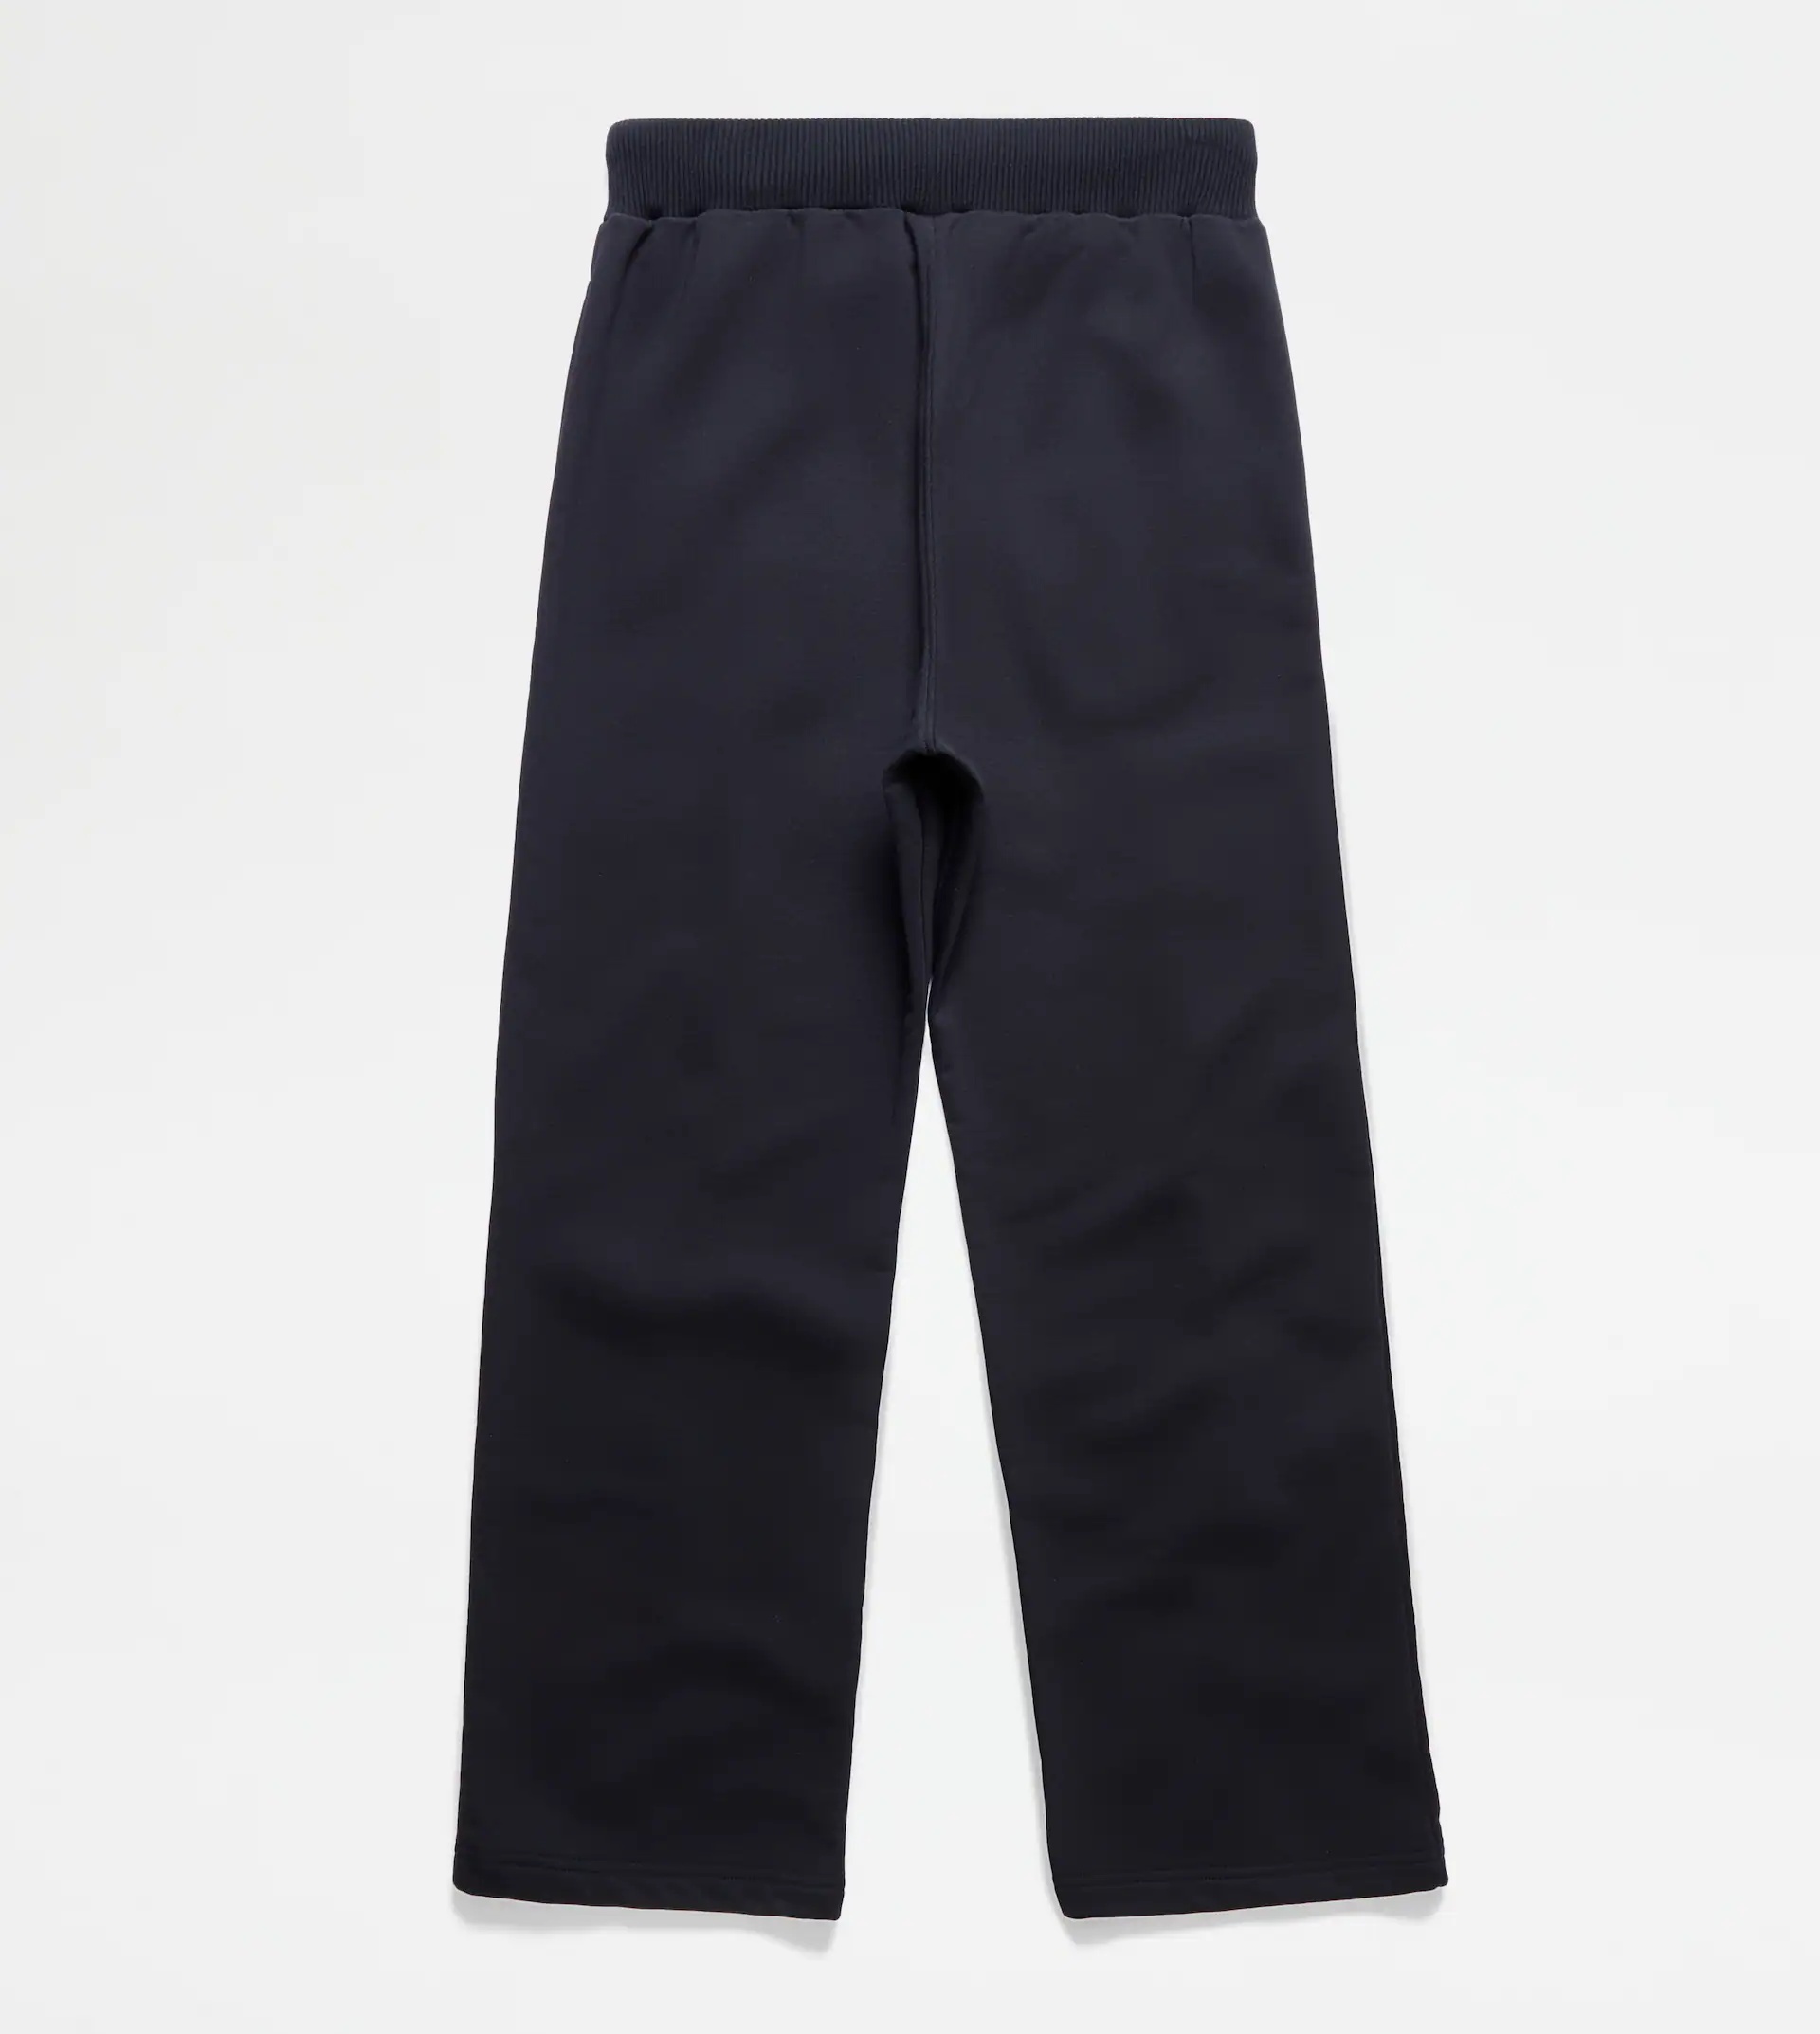 TRACKSUIT TROUSERS IN JERSEY - BLACK - 4